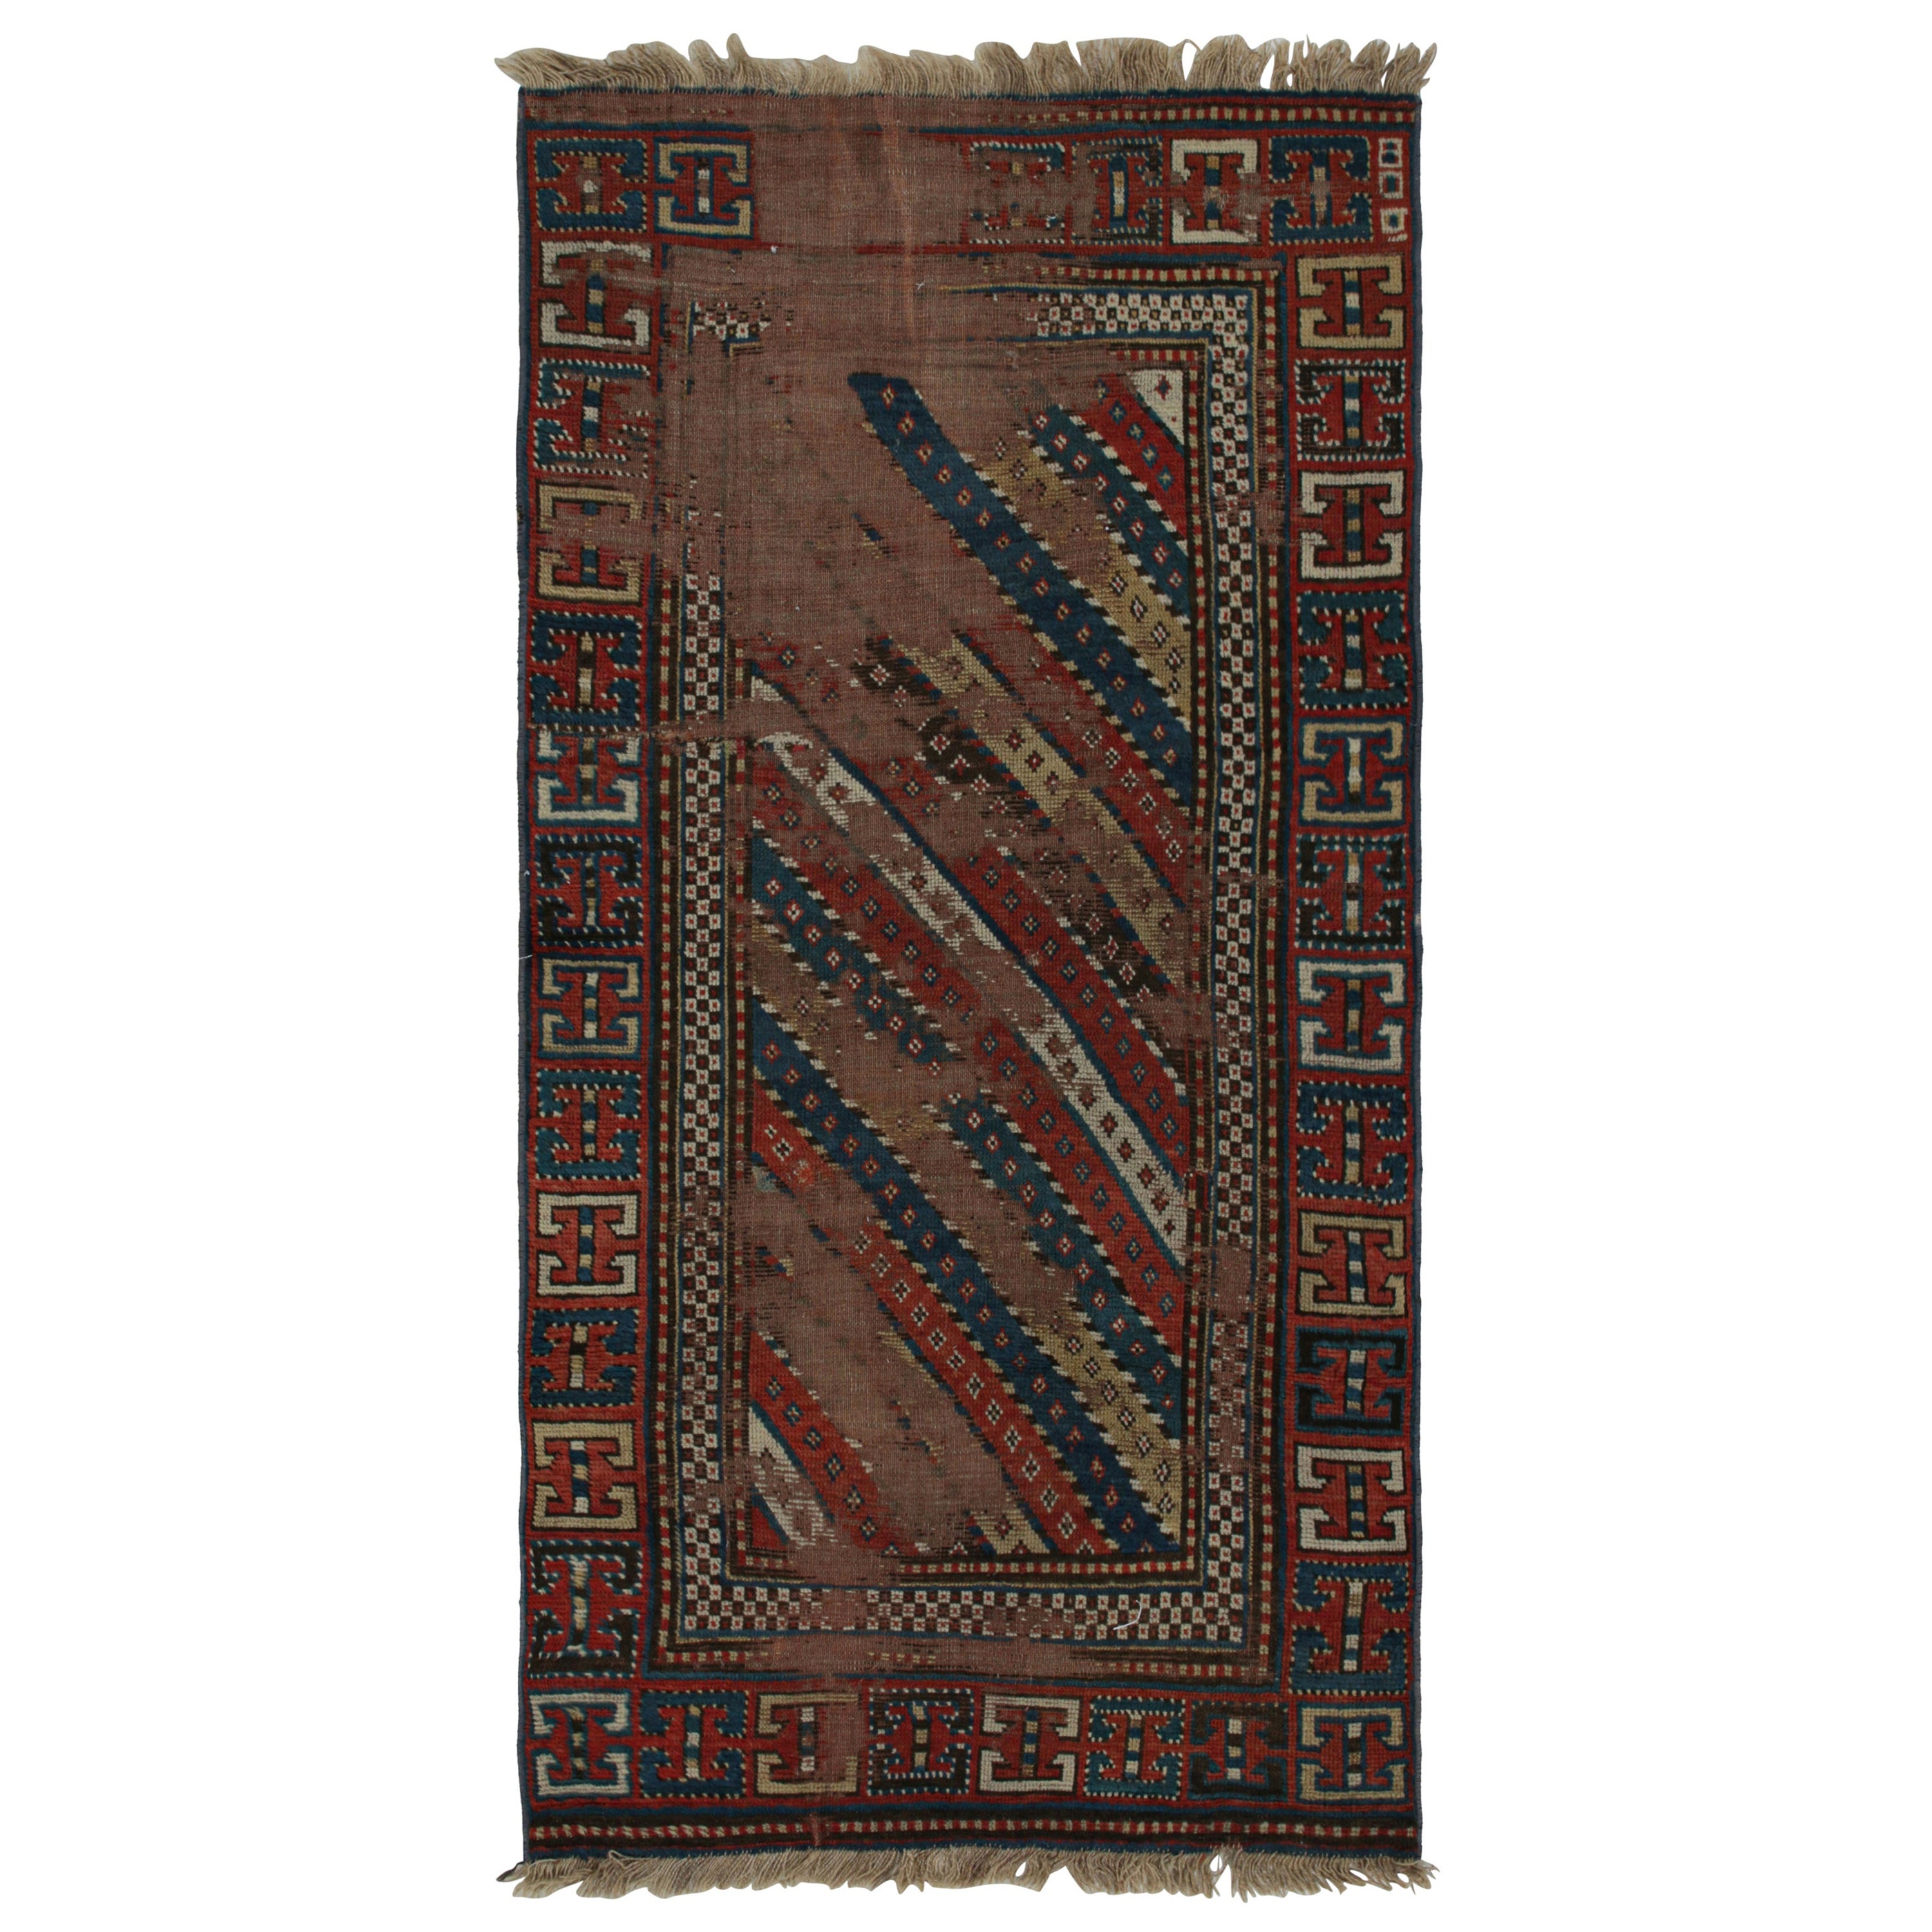 Antique Kazak Runner Rug with Red & Blue Geometric Patterns, from Rug & Kilim For Sale